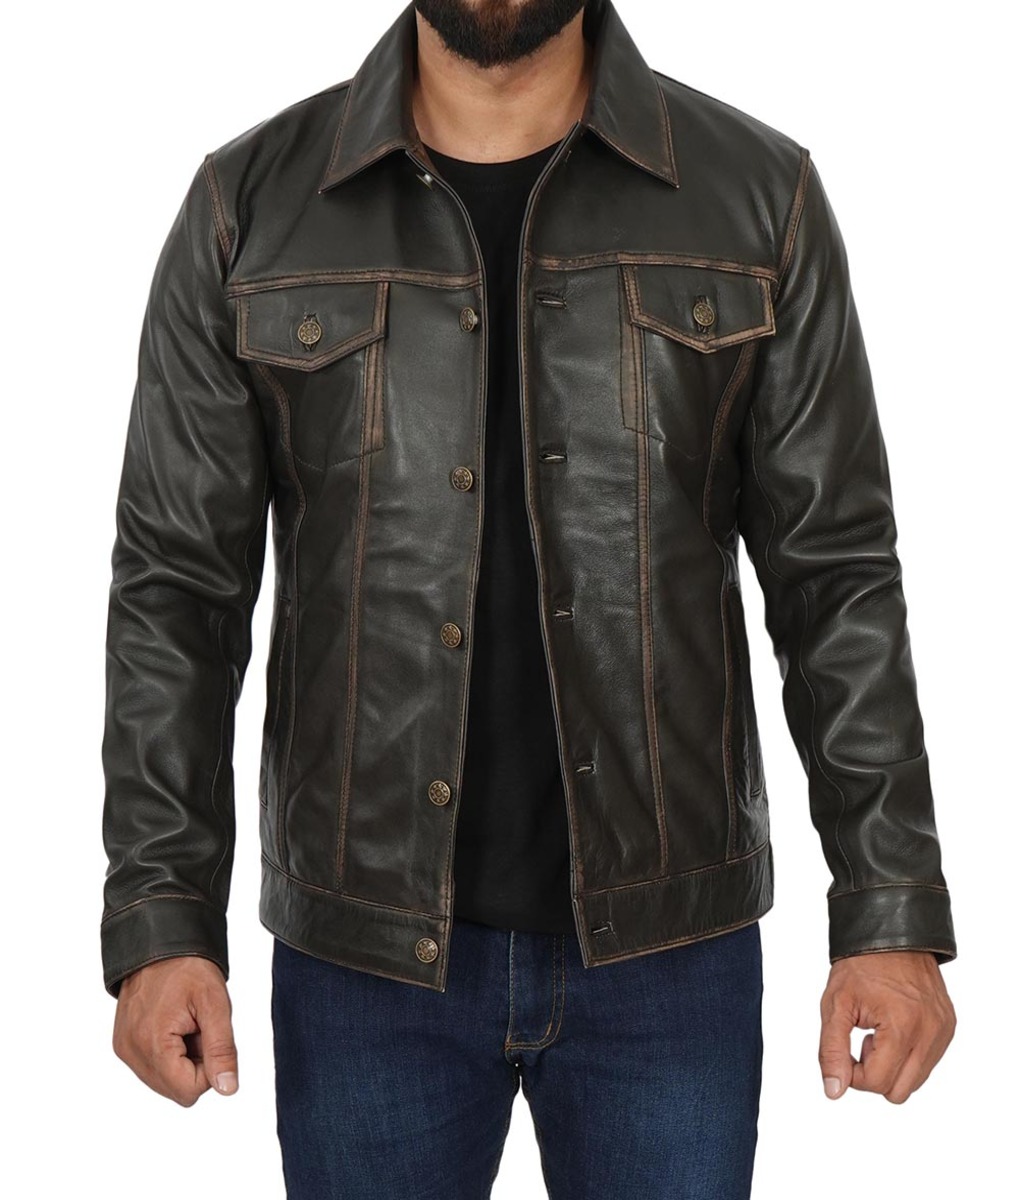 brown_real_lambskin_leather_jacket_for_mens_trucker_style